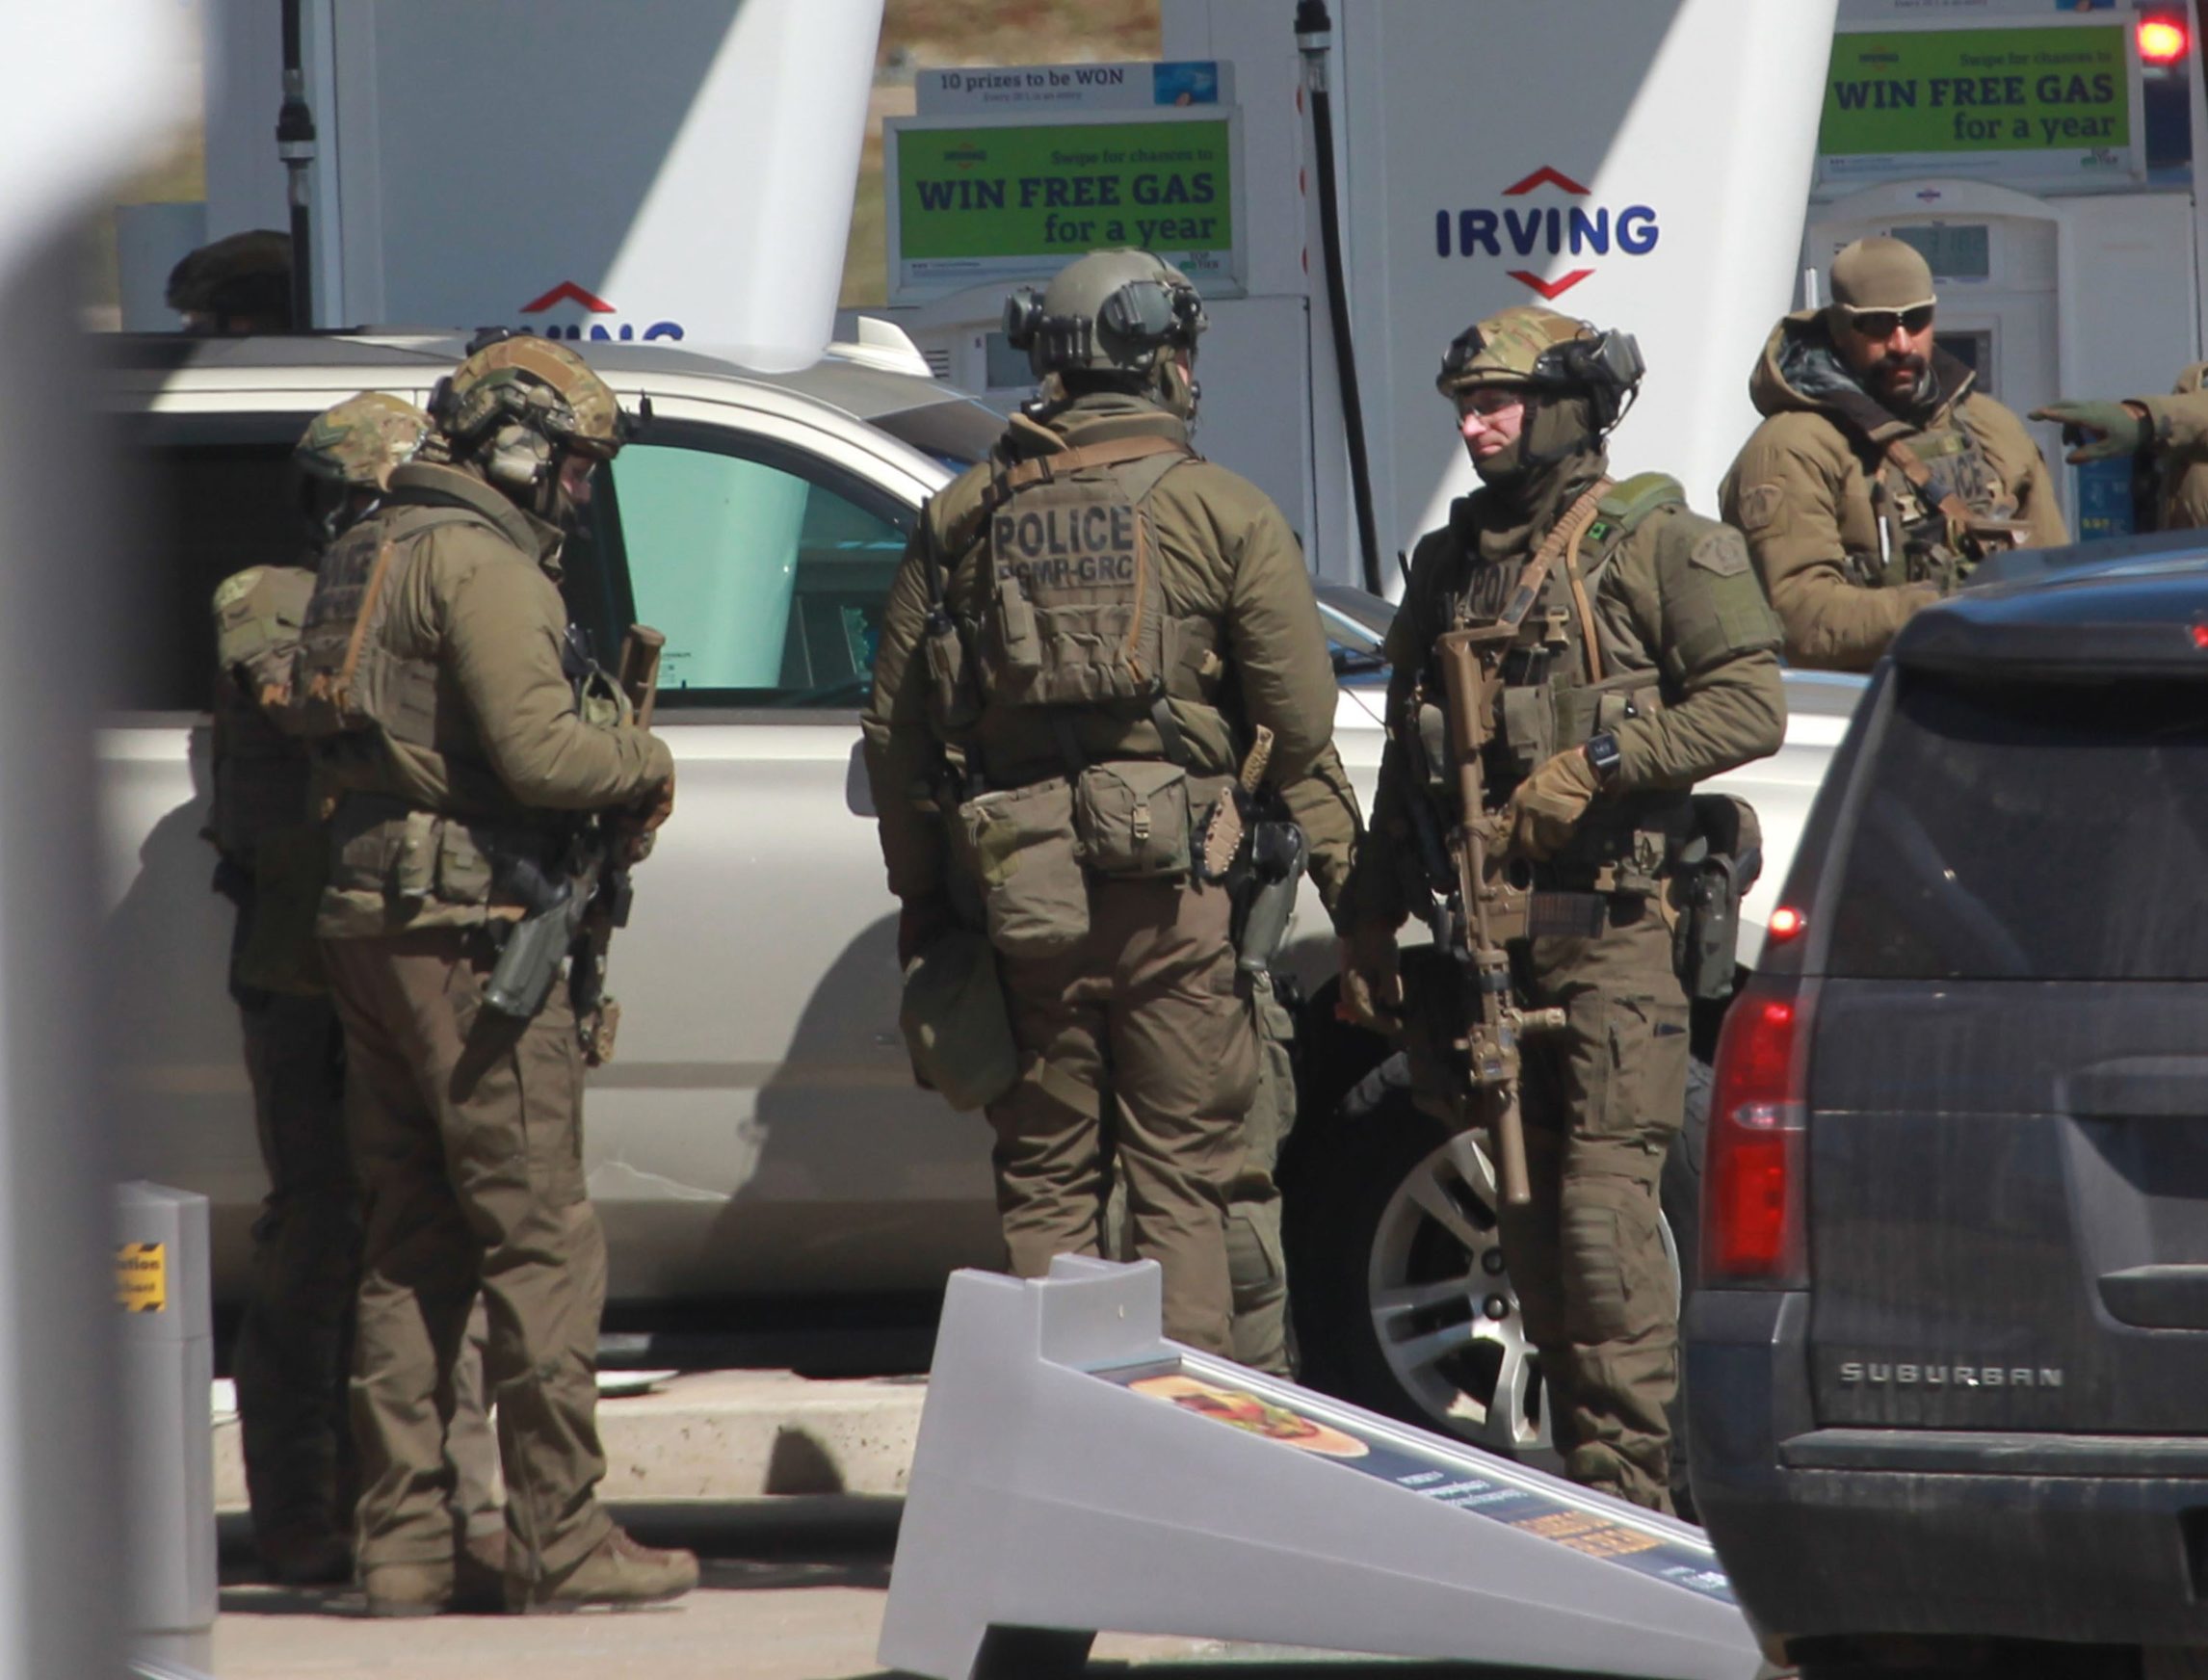 Members of the Royal Canadian Mounted Police (RCMP) tactical unit confer after the suspect in a deadly shooting rampage was neutralized at the Big Stop near Elmsdale, Nova Scotia, Canada, on April 19, 2020. - A gunman killed at least 10 people in an overnight shooting rampage across rural Nova Scotia, before being found dead following an hours-long manhunt, Canadian federal police said April 19. Earlier identified as 51-year-old Gabriel Wortman, the suspect had been on the run since Saturday night, when police were alerted to shots being fired in the small community of Portapique, around 100 kilometers (60 miles) from Halifax, capital of the Atlantic province. (Photo by tim krochak / AFP)